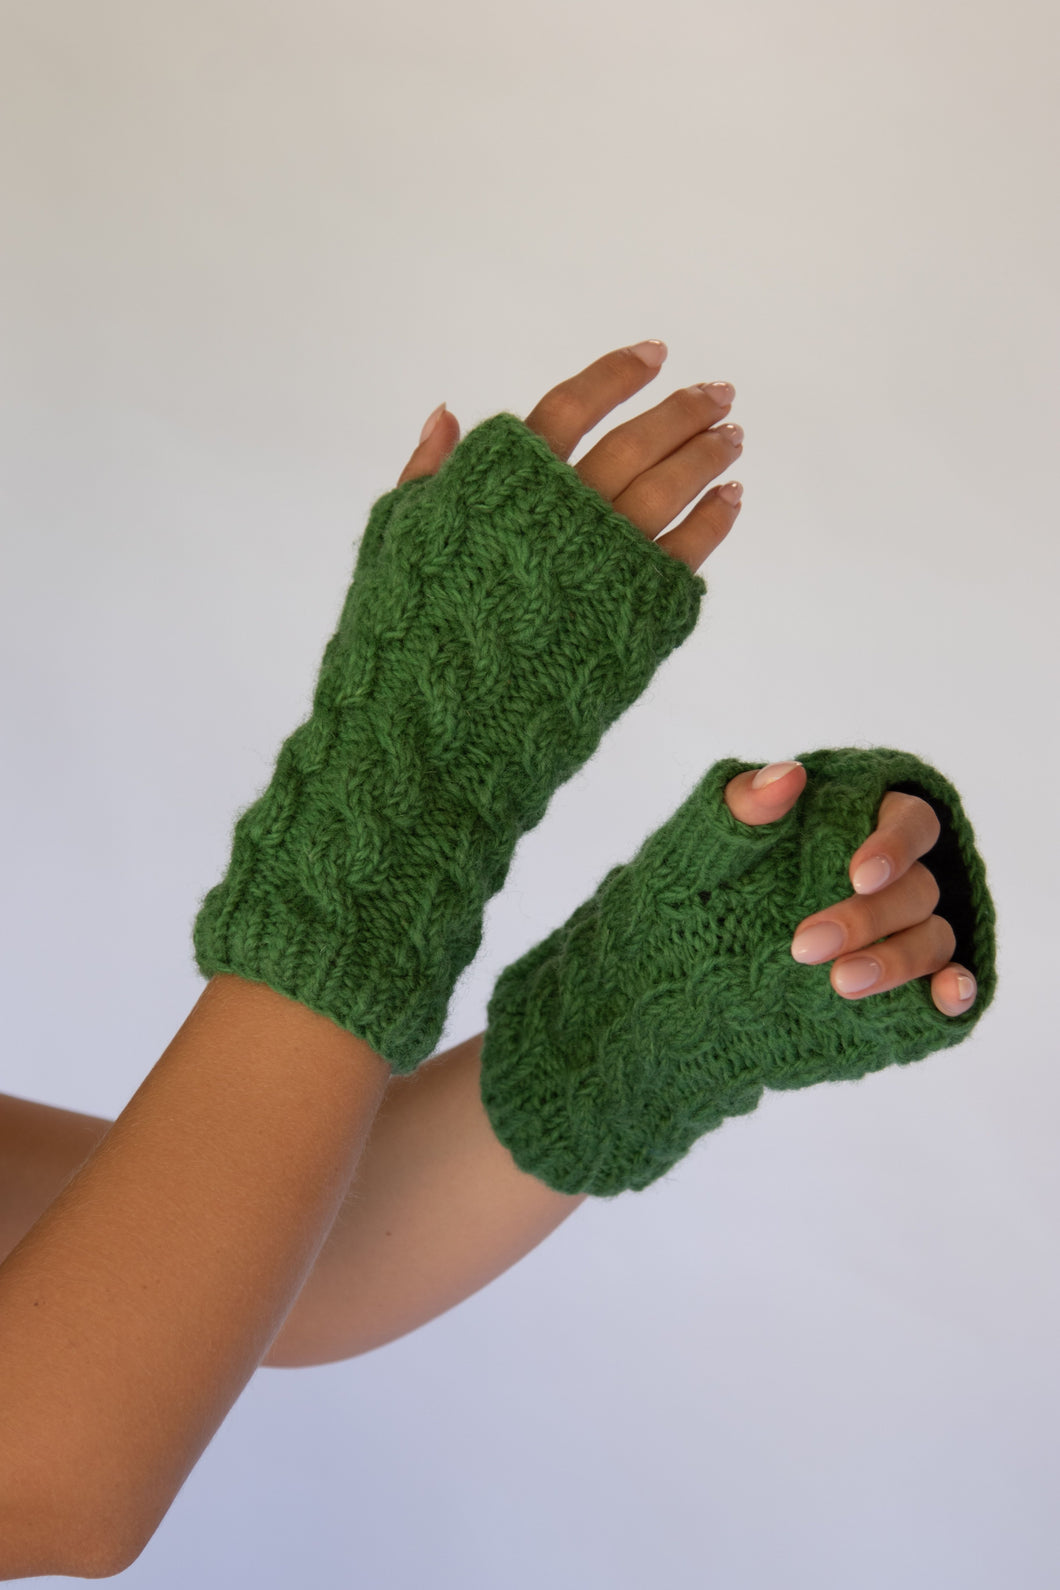 Val Fingerless Gloves, Hand Made in 100% Wool in Meadow, Navy and Birch from Hobo and Hatch